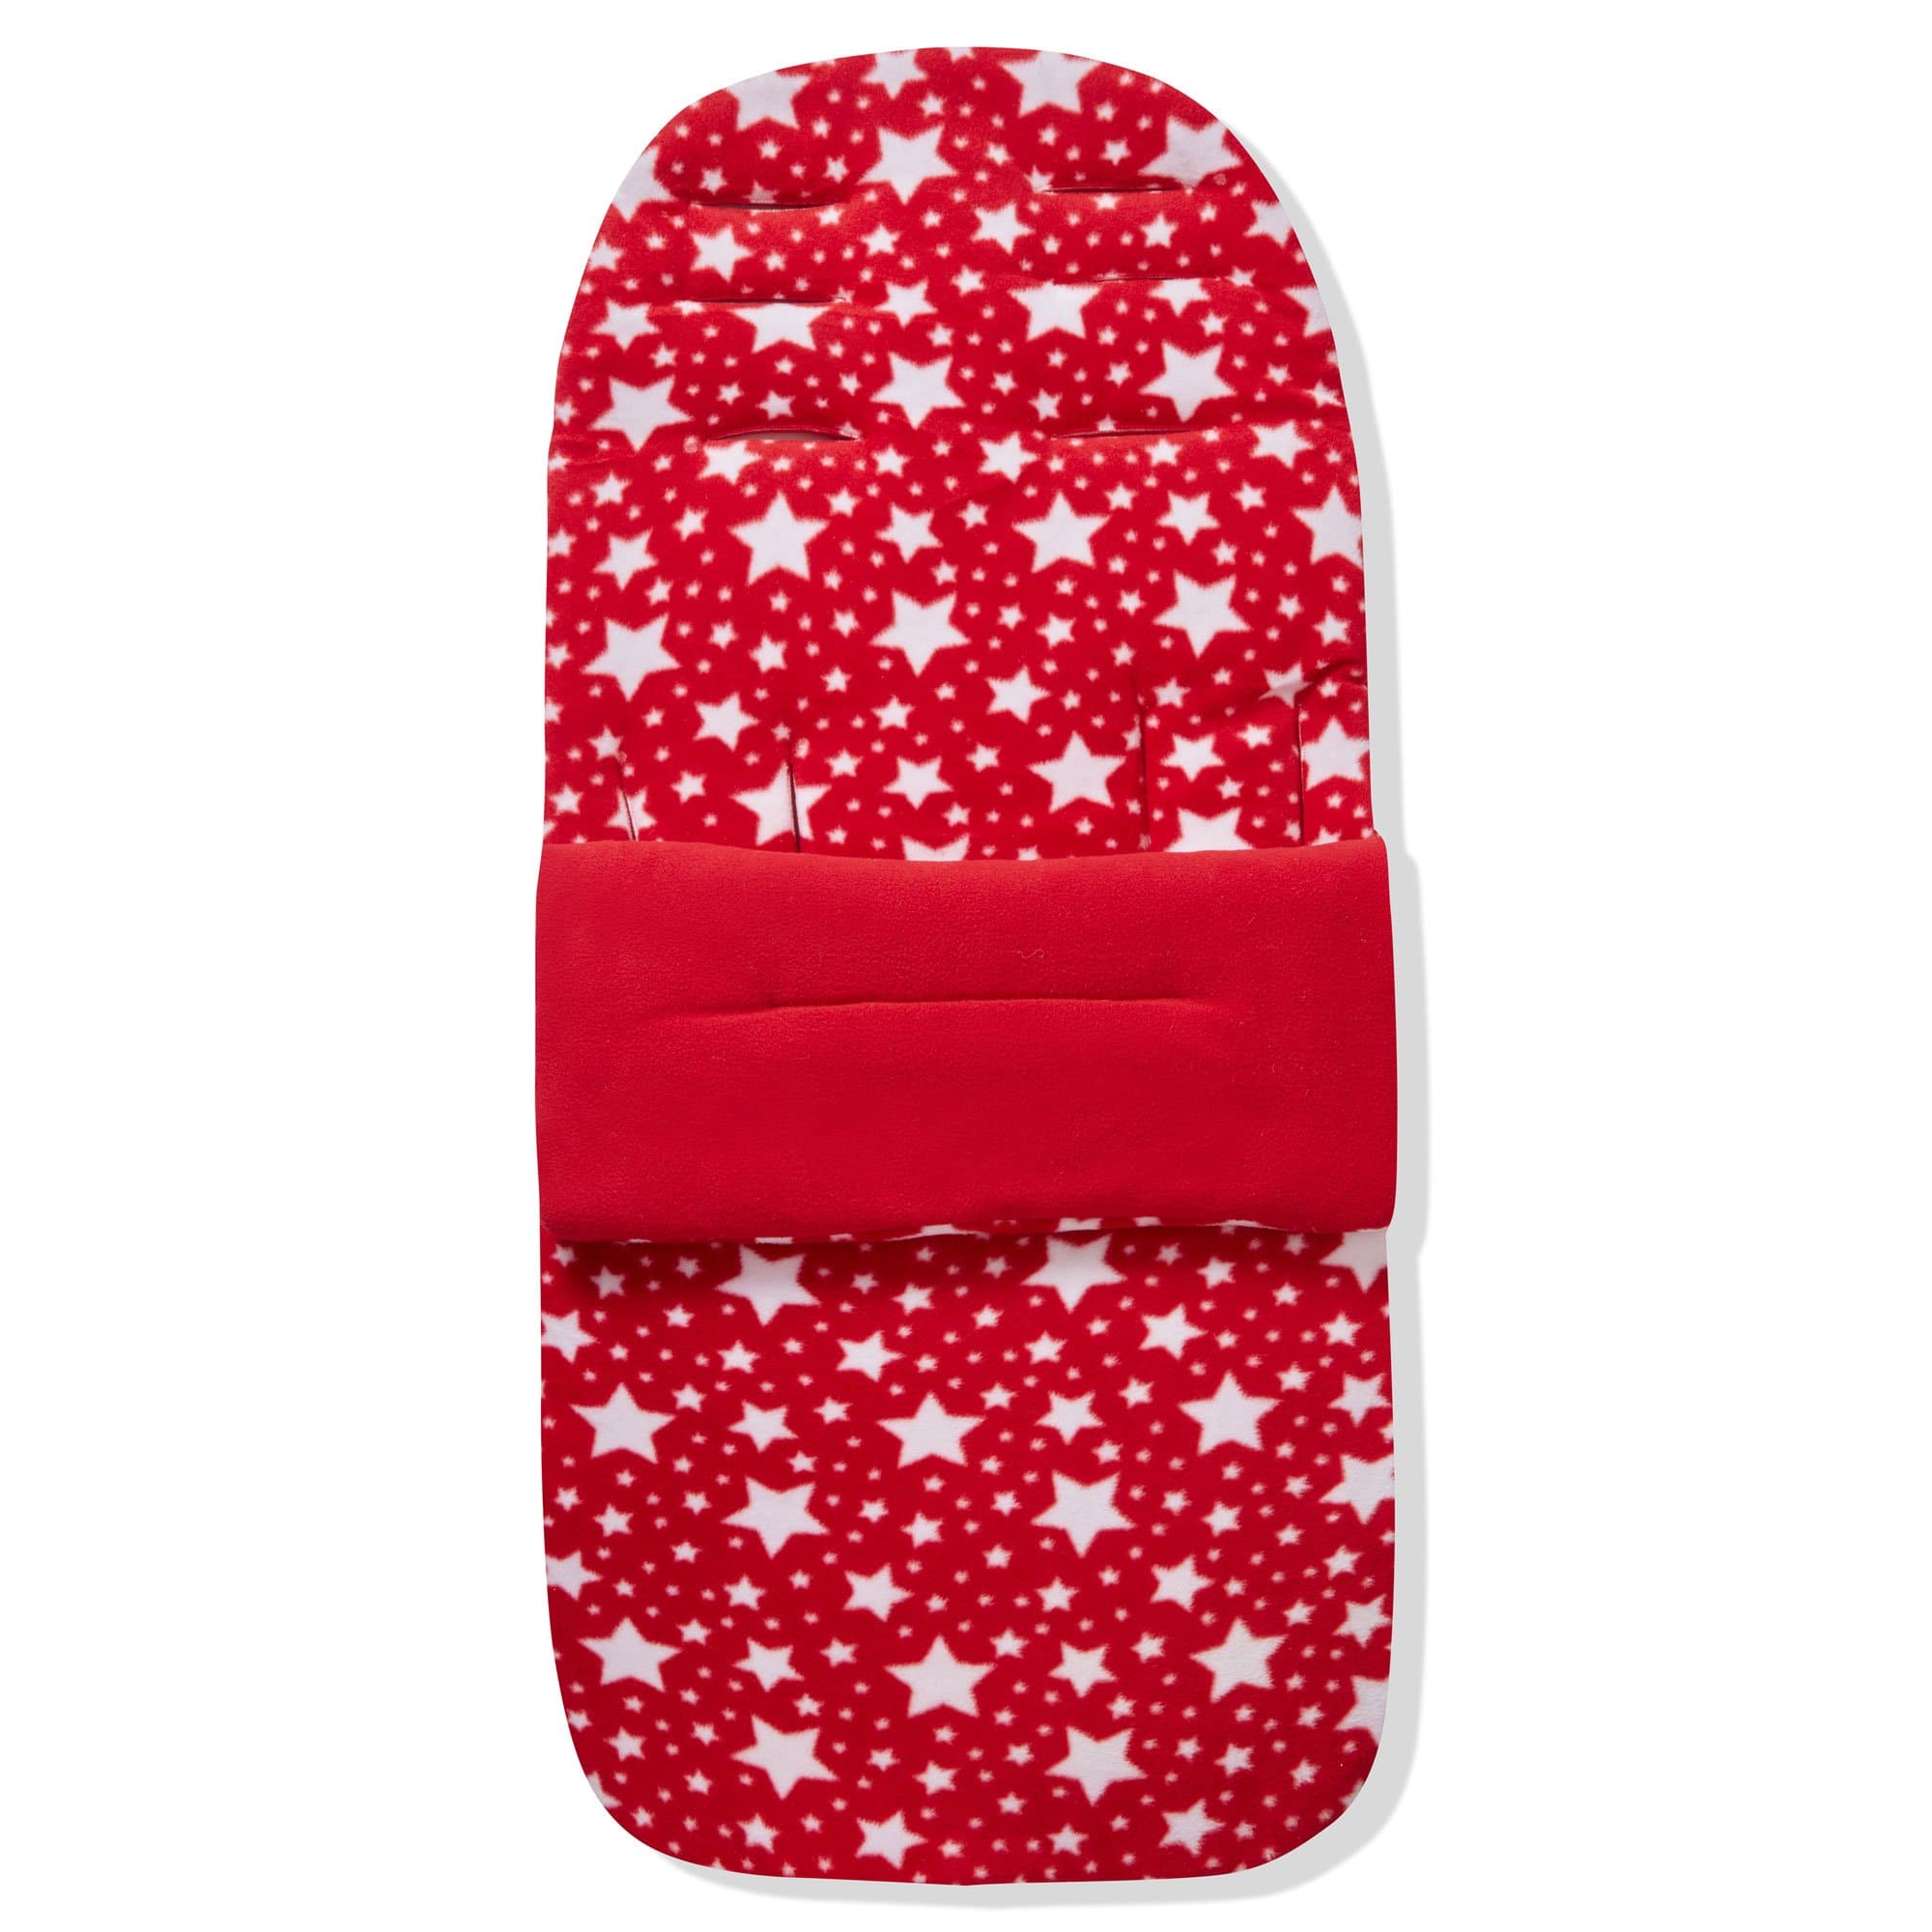 Fleece Footmuff / Cosy Toes Compatible with My Babiie - For Your Little One